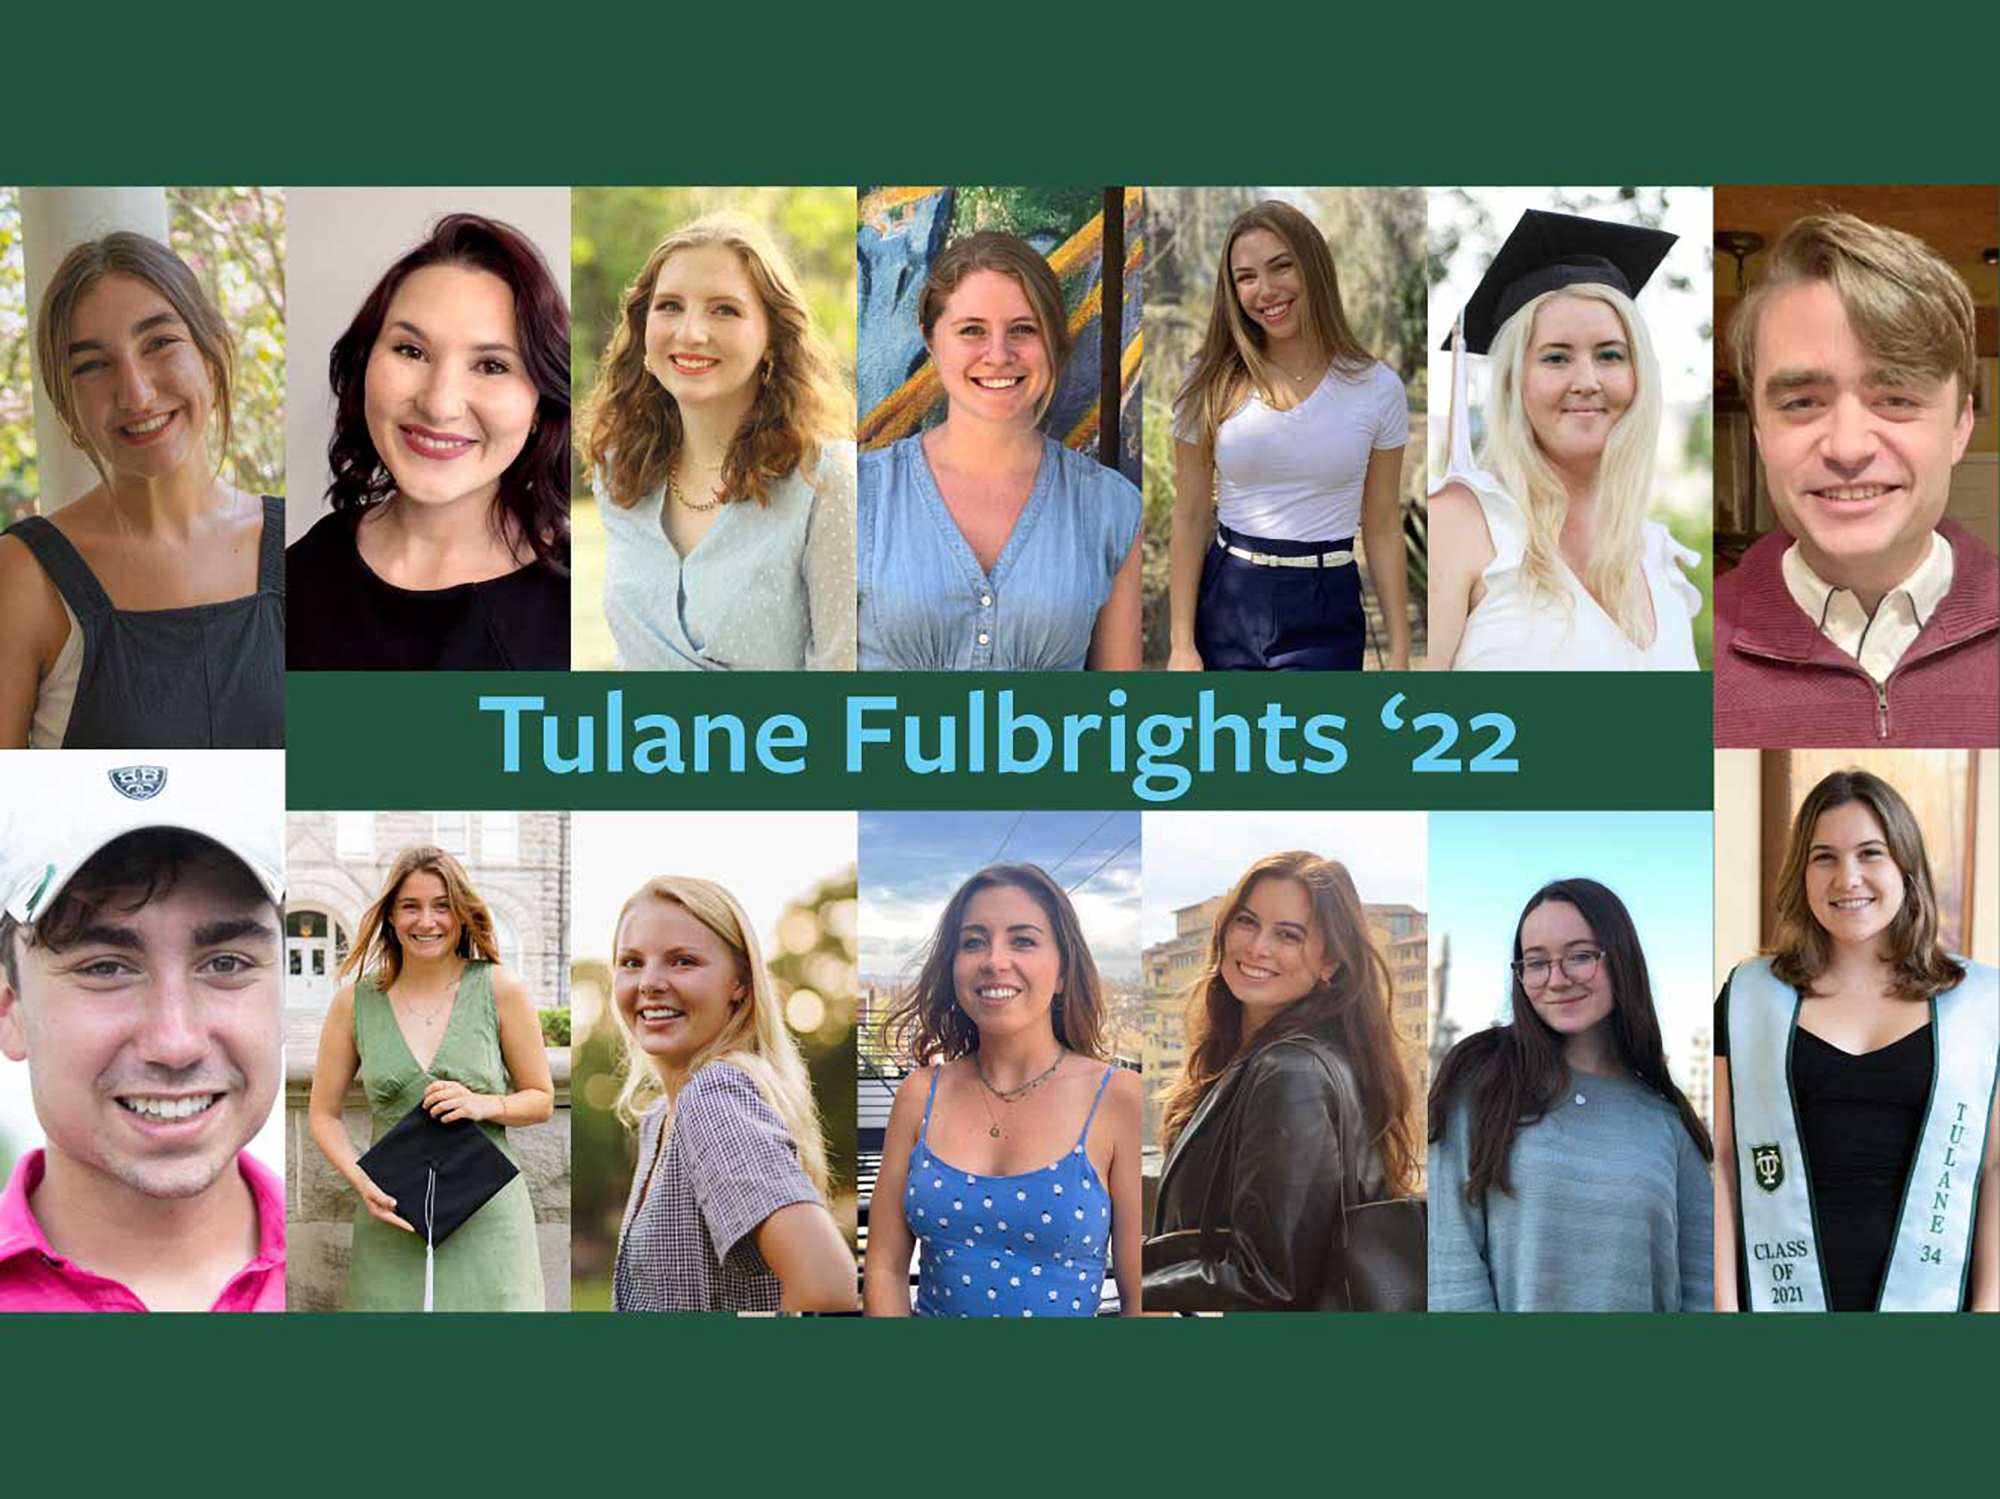 15 Confirmed Tulane Fulbright recipients, 8 more selected as alternates